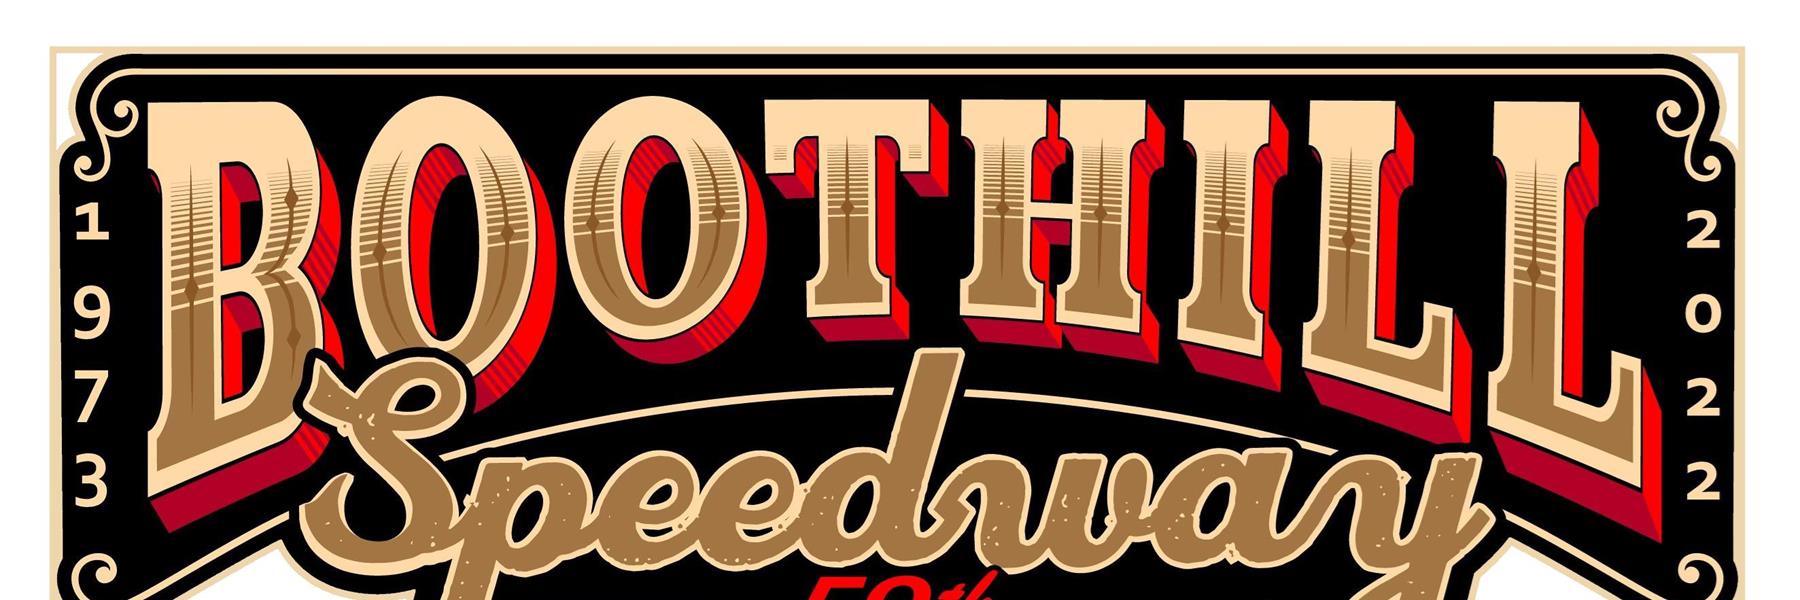 6/4/2022 - Boothill Speedway